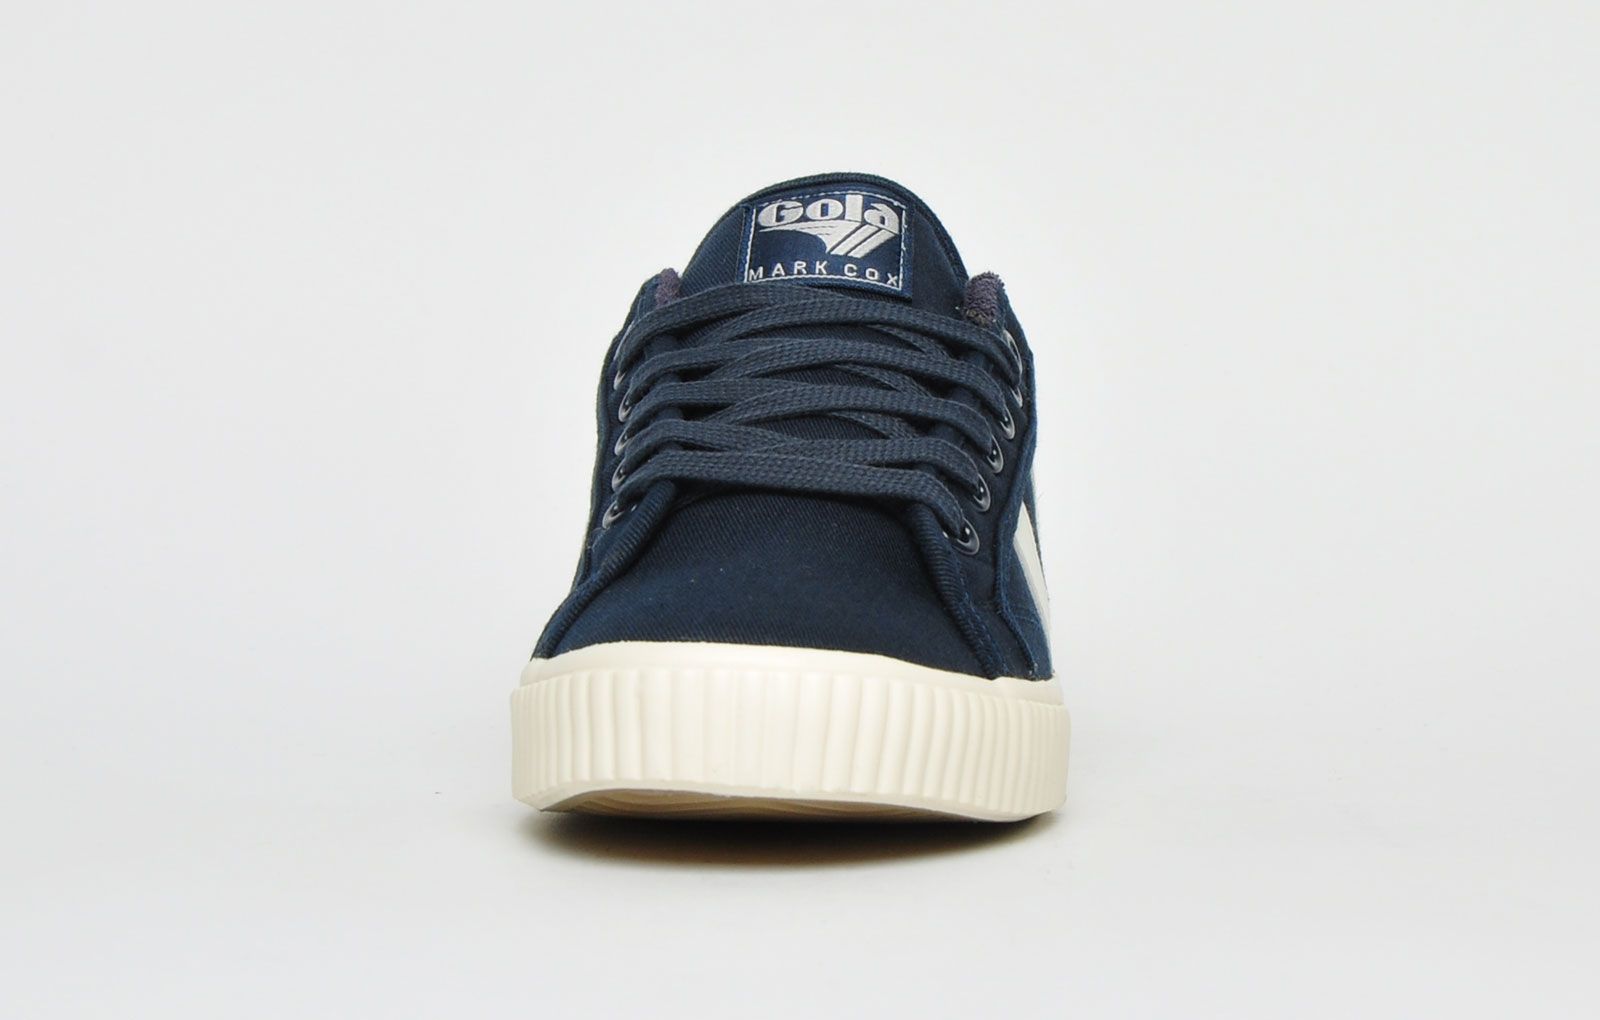 The Gola Classics Tennis Mark Cox is an update of the original Gola Tennis shoe design from 1973. Featuring a navy canvas textile upper with contrasting Gola branding and a sleek vintage styled sole to give a clean and fresh look. Offering enhanced comfort with a padded soft brushed lining and padded insole, its versatile style can be teamed with a variety of looks to add a relaxed touch to any outfit. <p>- Retro style trainers</p> <p>- Vegan Friendly</p> <p>- Soft lining for additional comfort</p> <p> - Premium canvas textile upper</p> <p>- Lace-up closure</p> <p>- Gola Classics branding throughout</p>